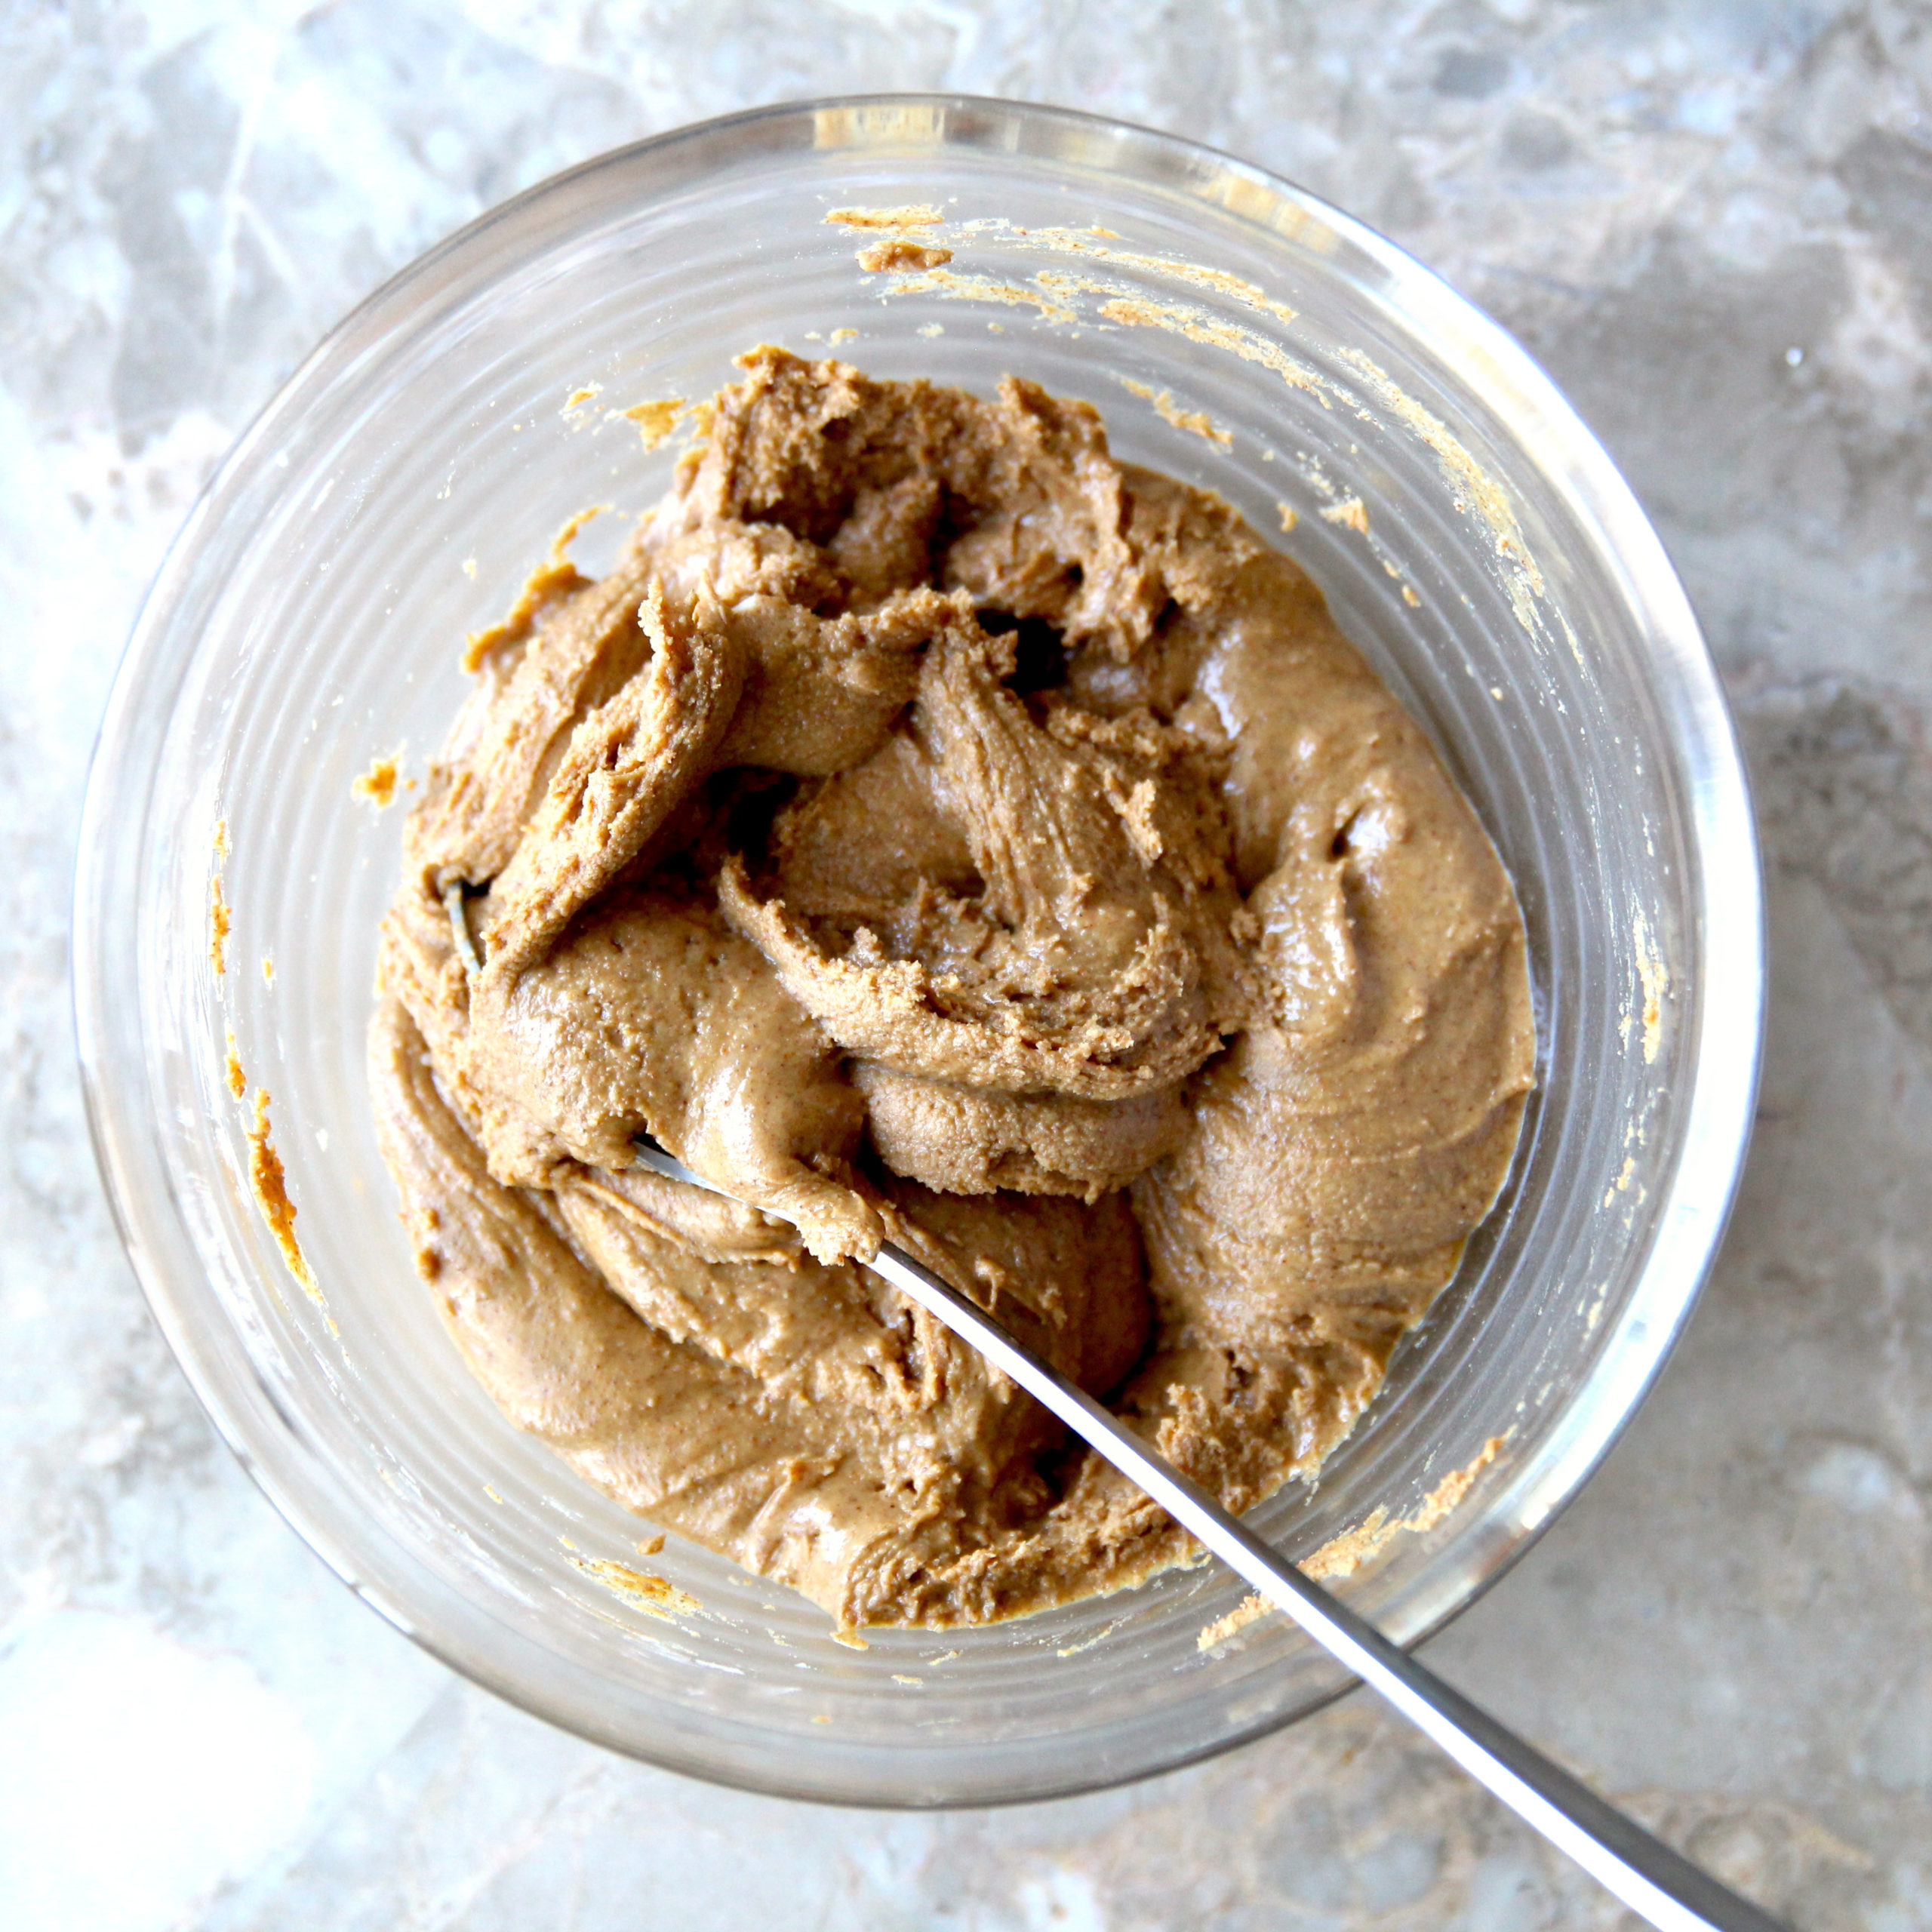 Healthy Vegan Almond Butter Frosting Made With Sweet Potatoes - Almond Butter Frosting